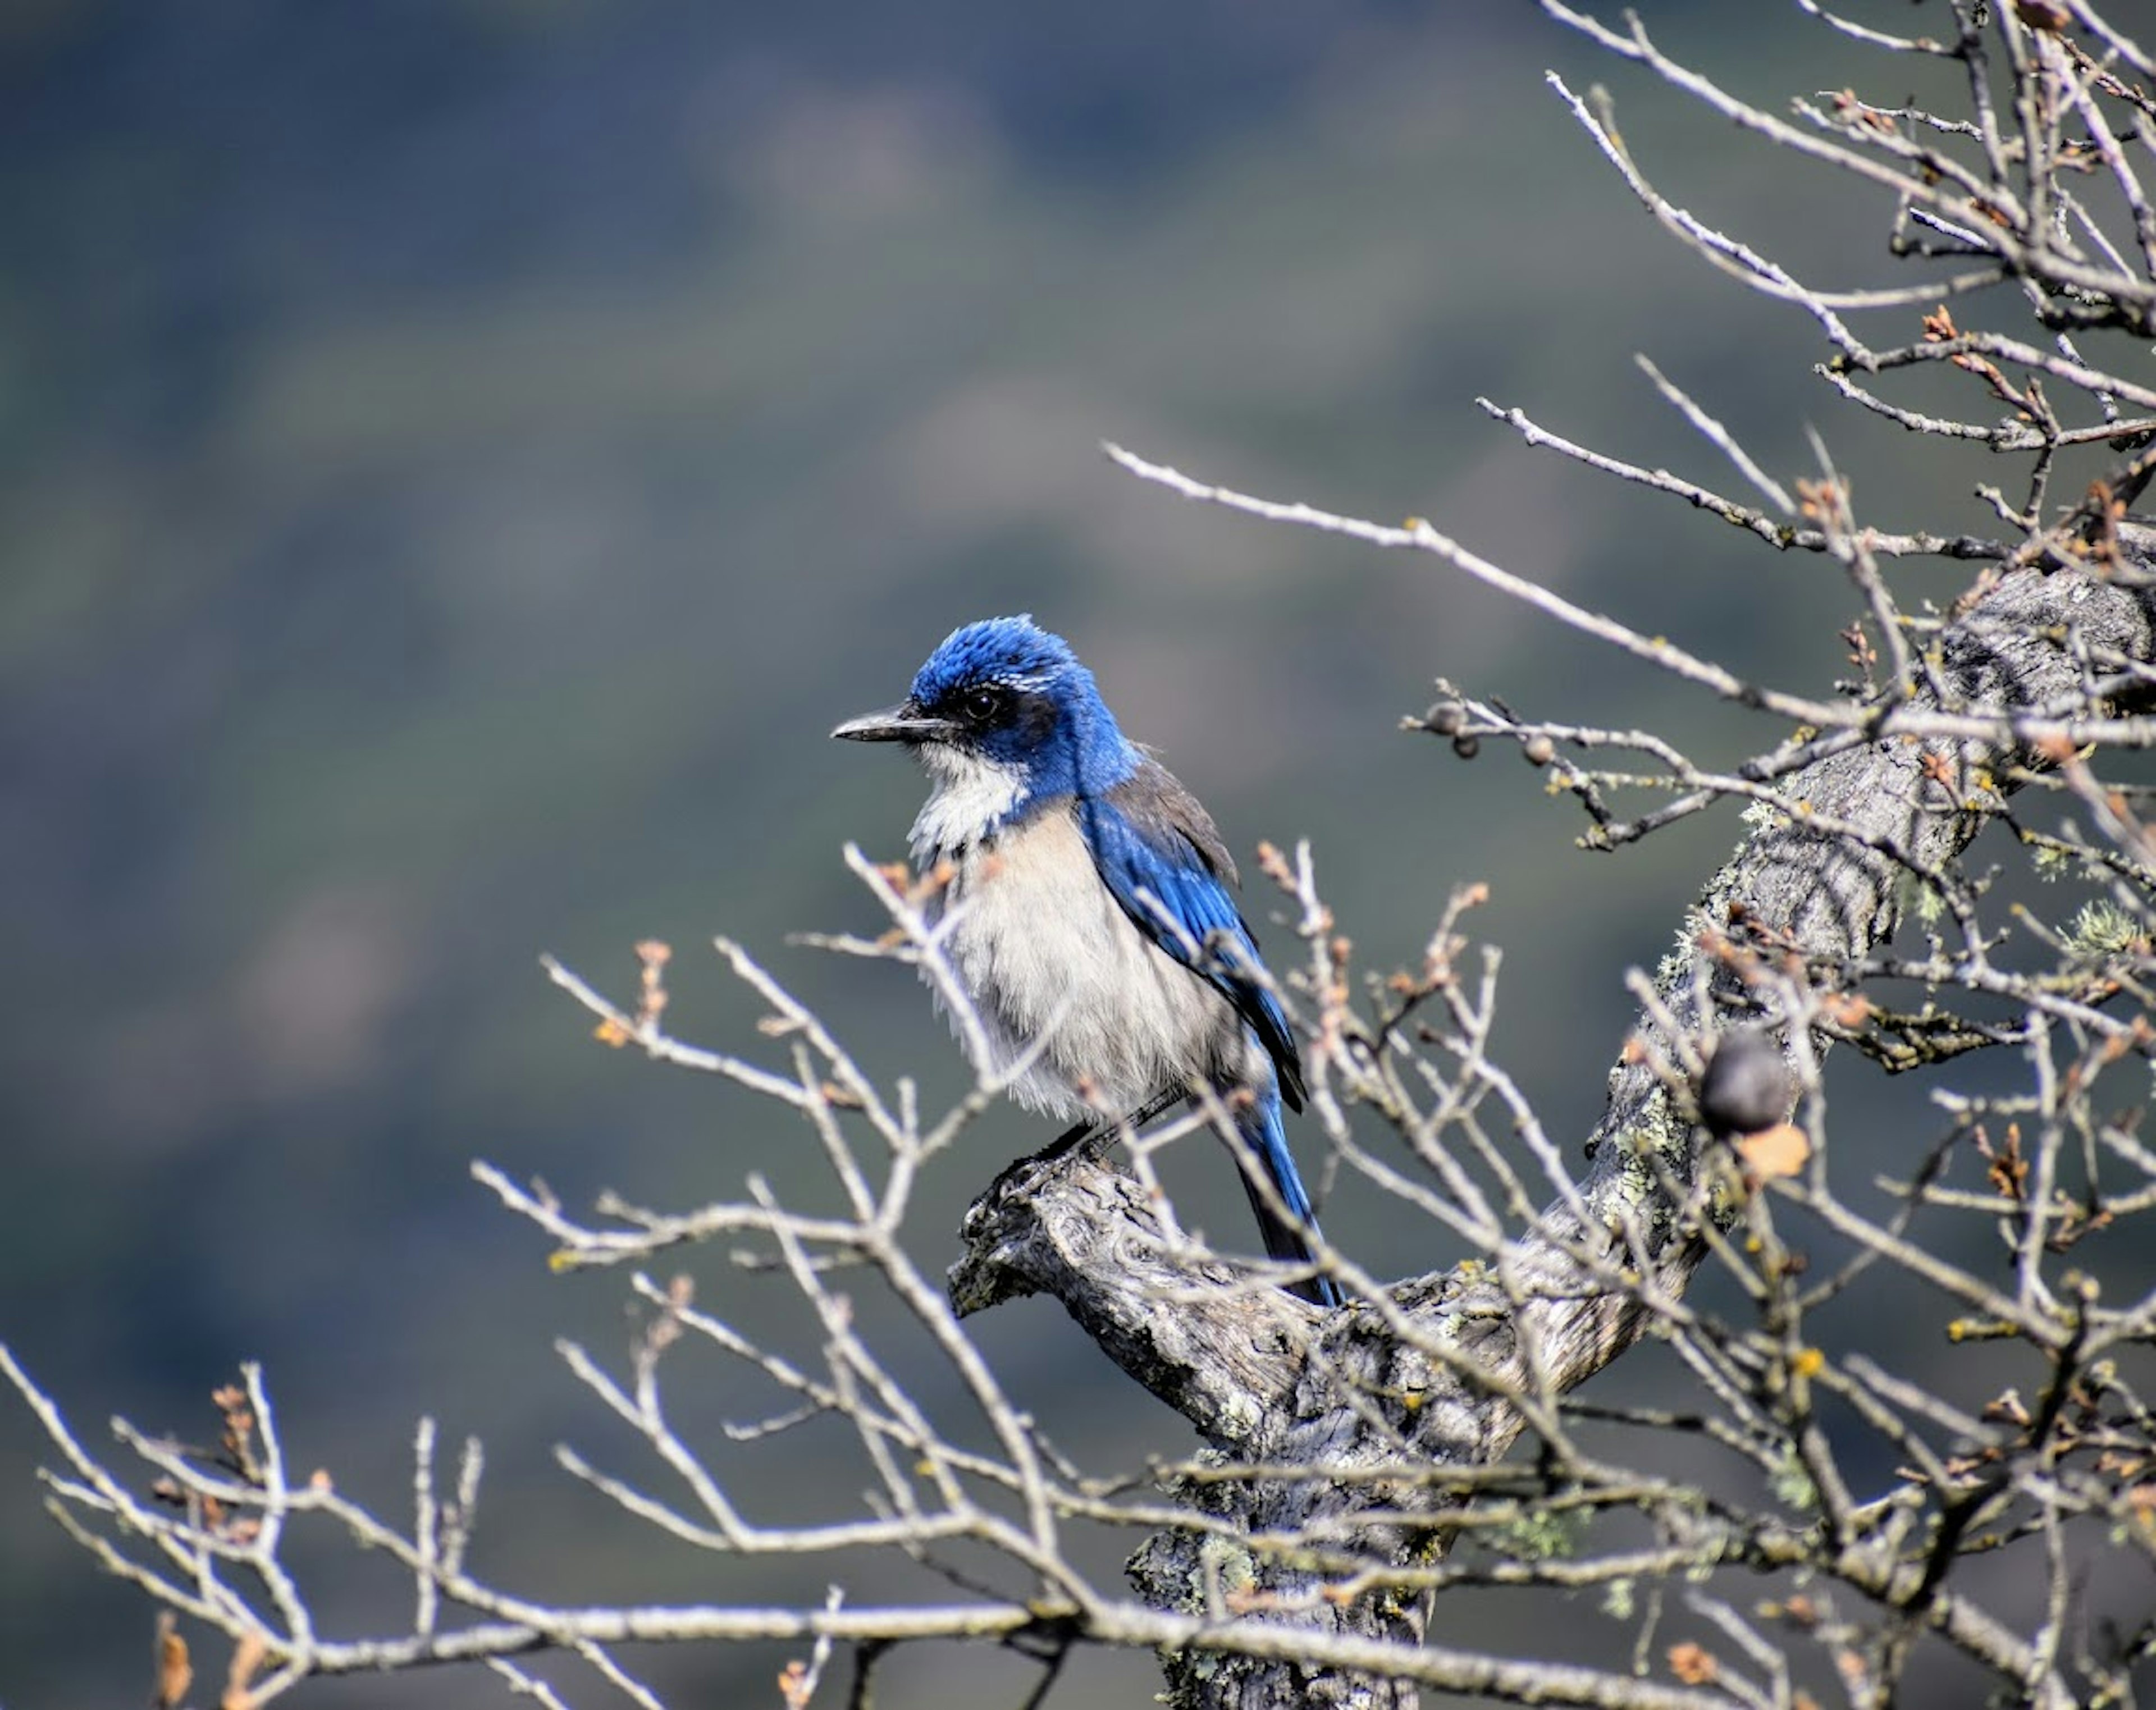 The Scrub Jay is endemic to Santa Cruz Island off the coast of Southern California. TLC also wrote a song about this bird. They didn't want them.